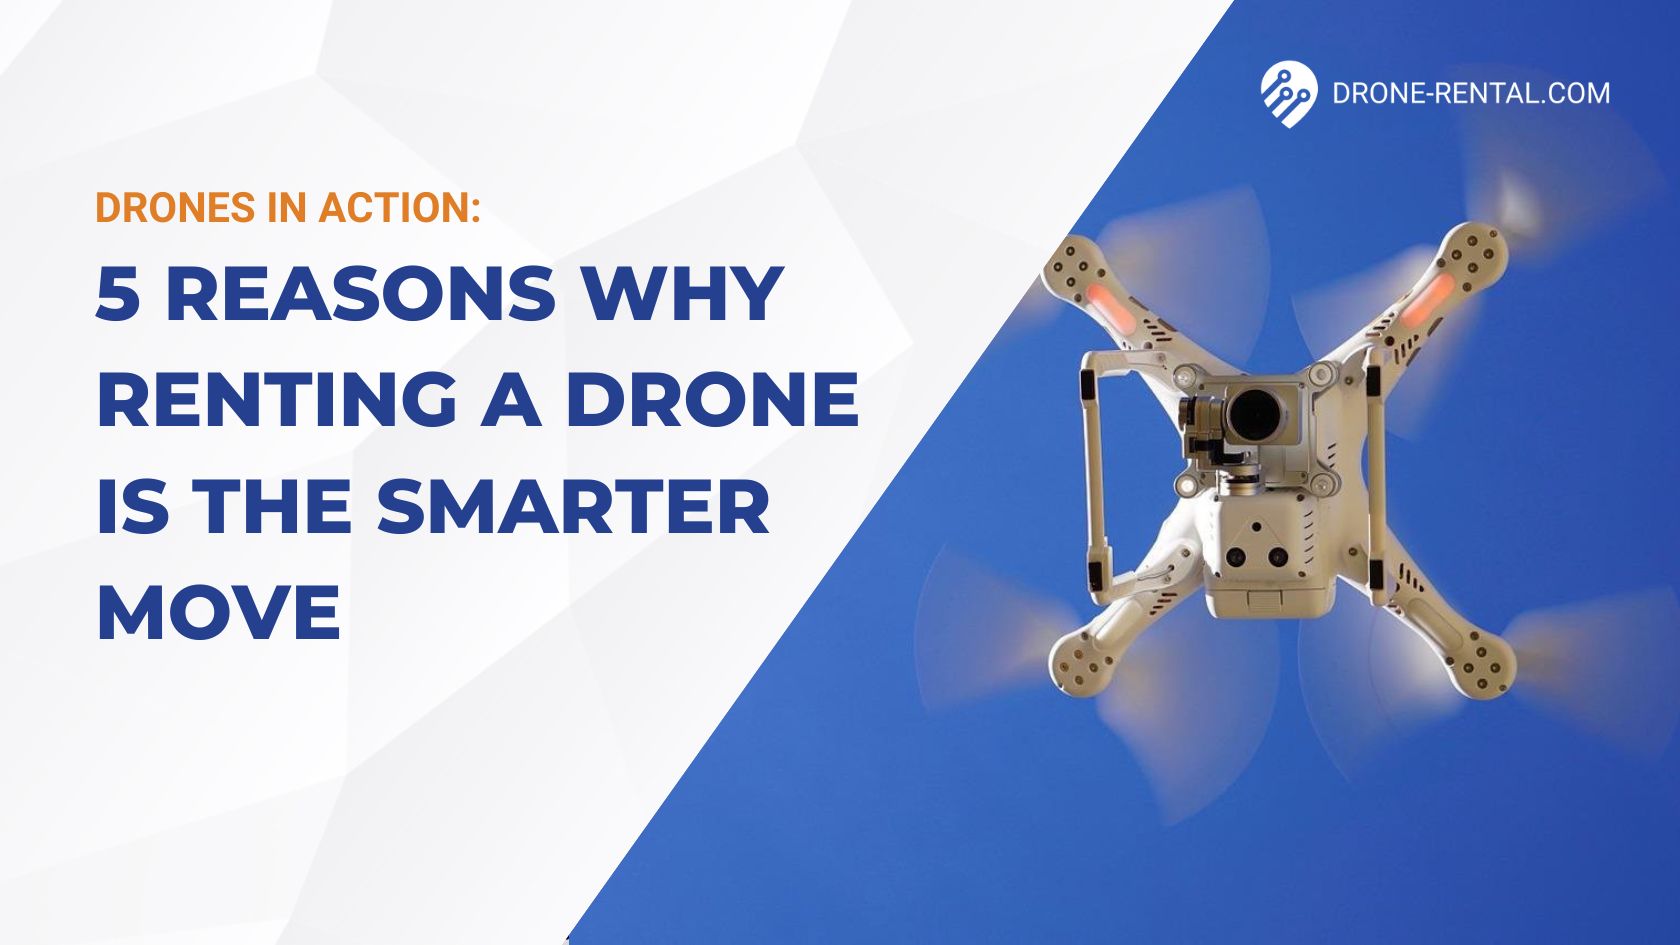 5 reasons why renting a drone is the smarter move